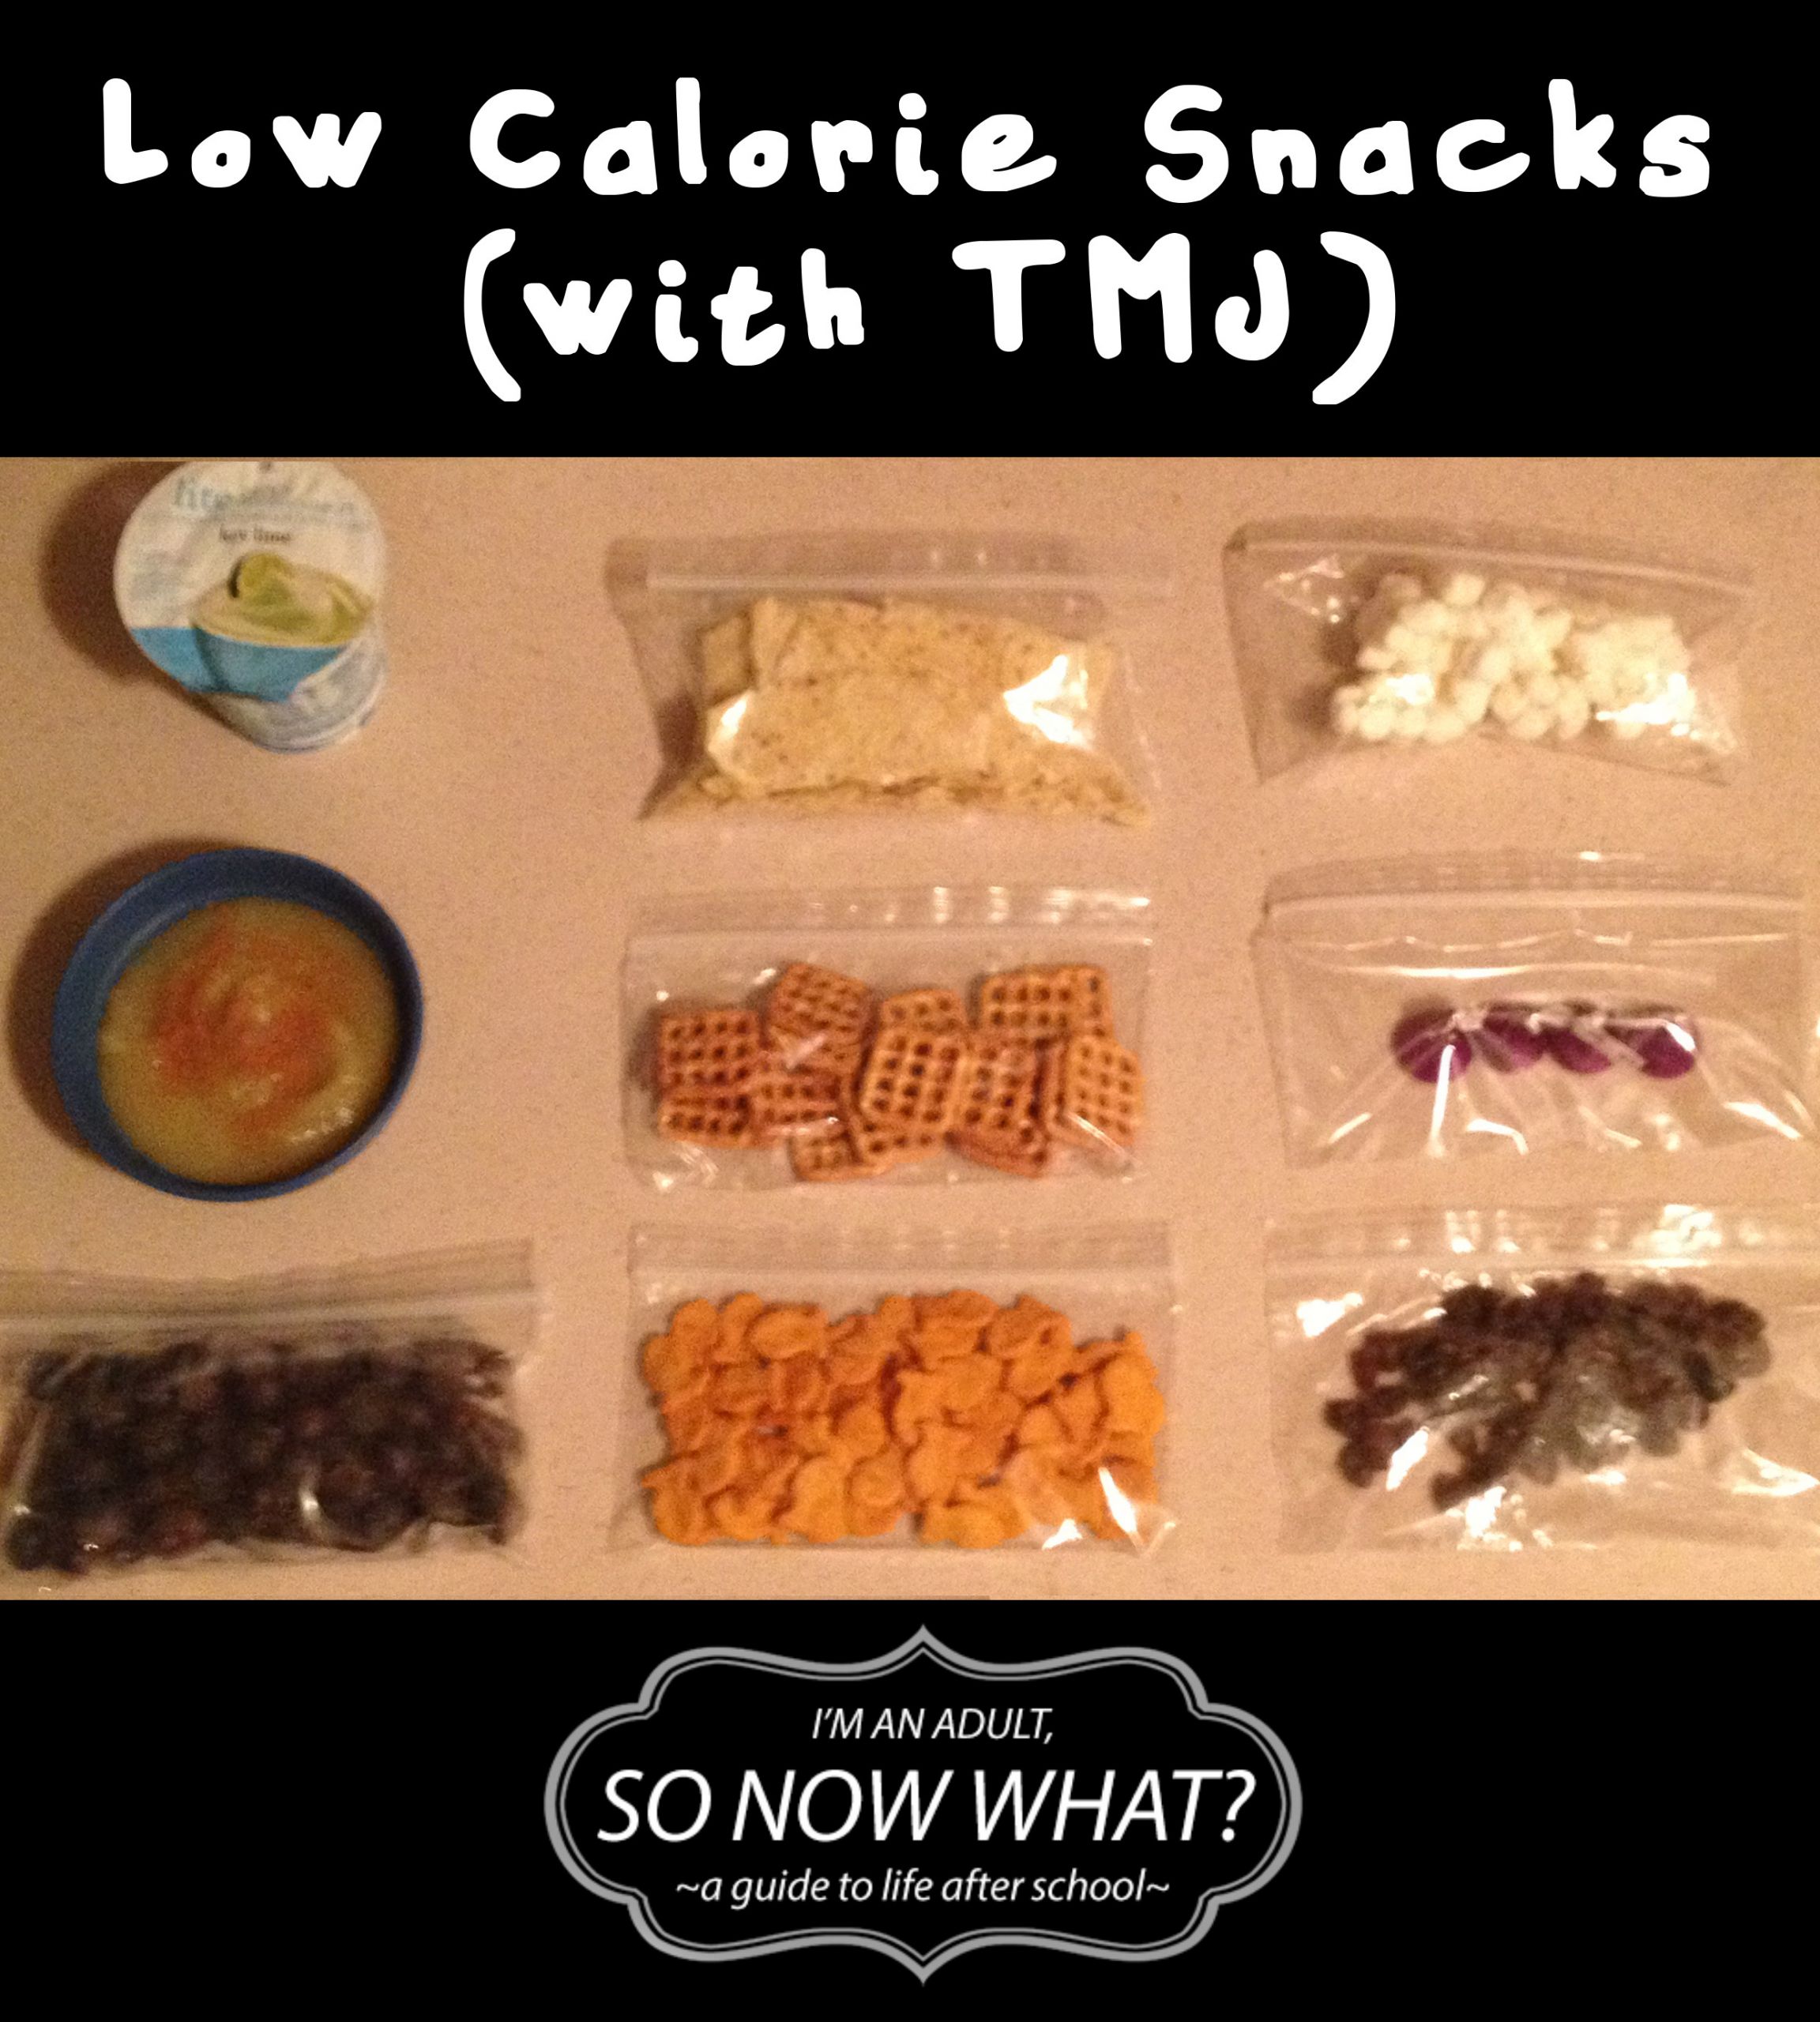 Low Calorie Crackers
 Low Calorie Snacks with TMJ